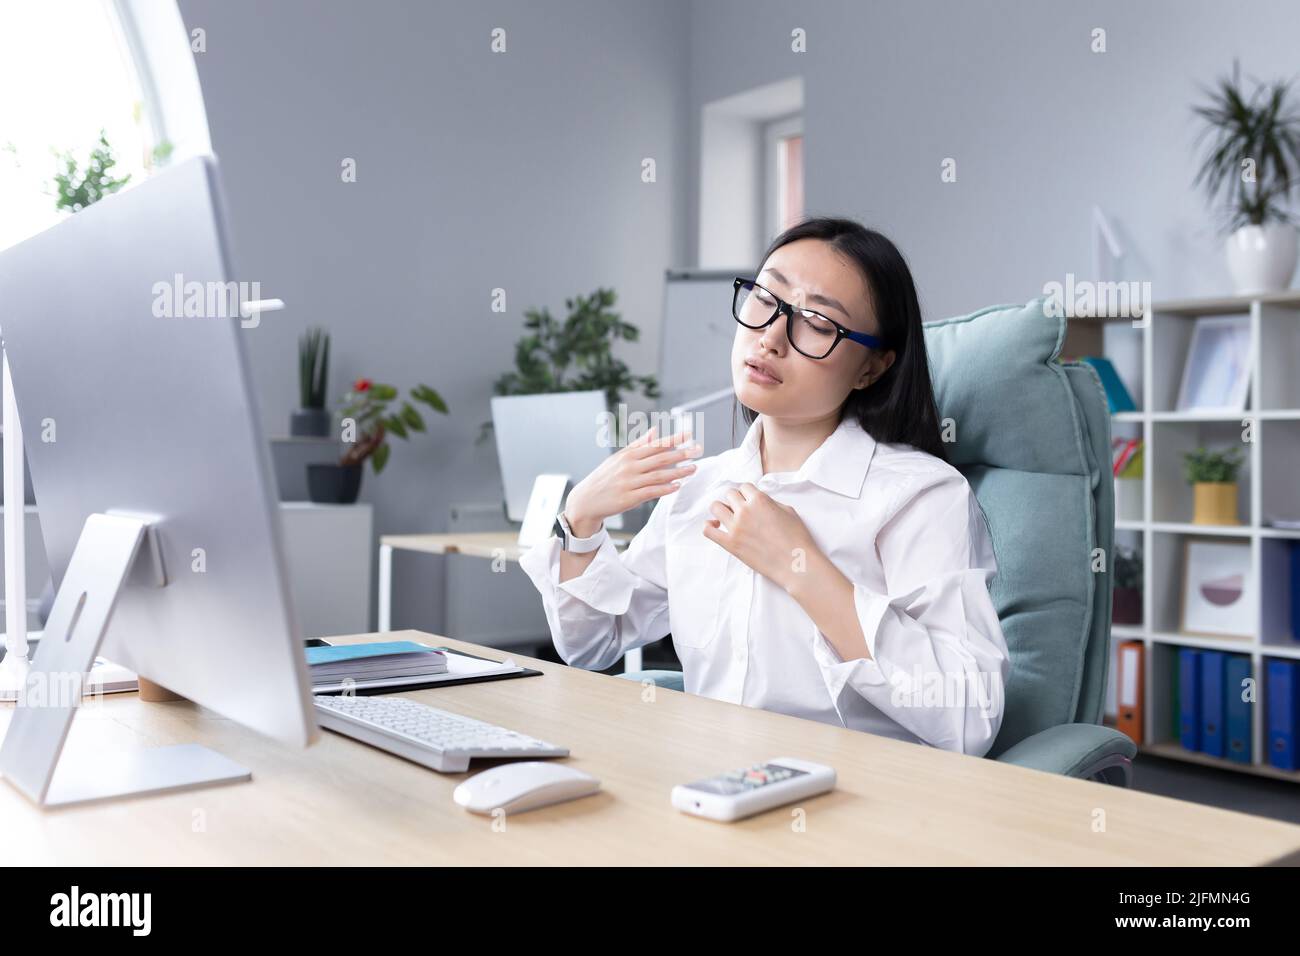 Heat in the office, Asian woman trying to freshen up, business woman working at the computer, waving her hands to cool down. Stock Photo